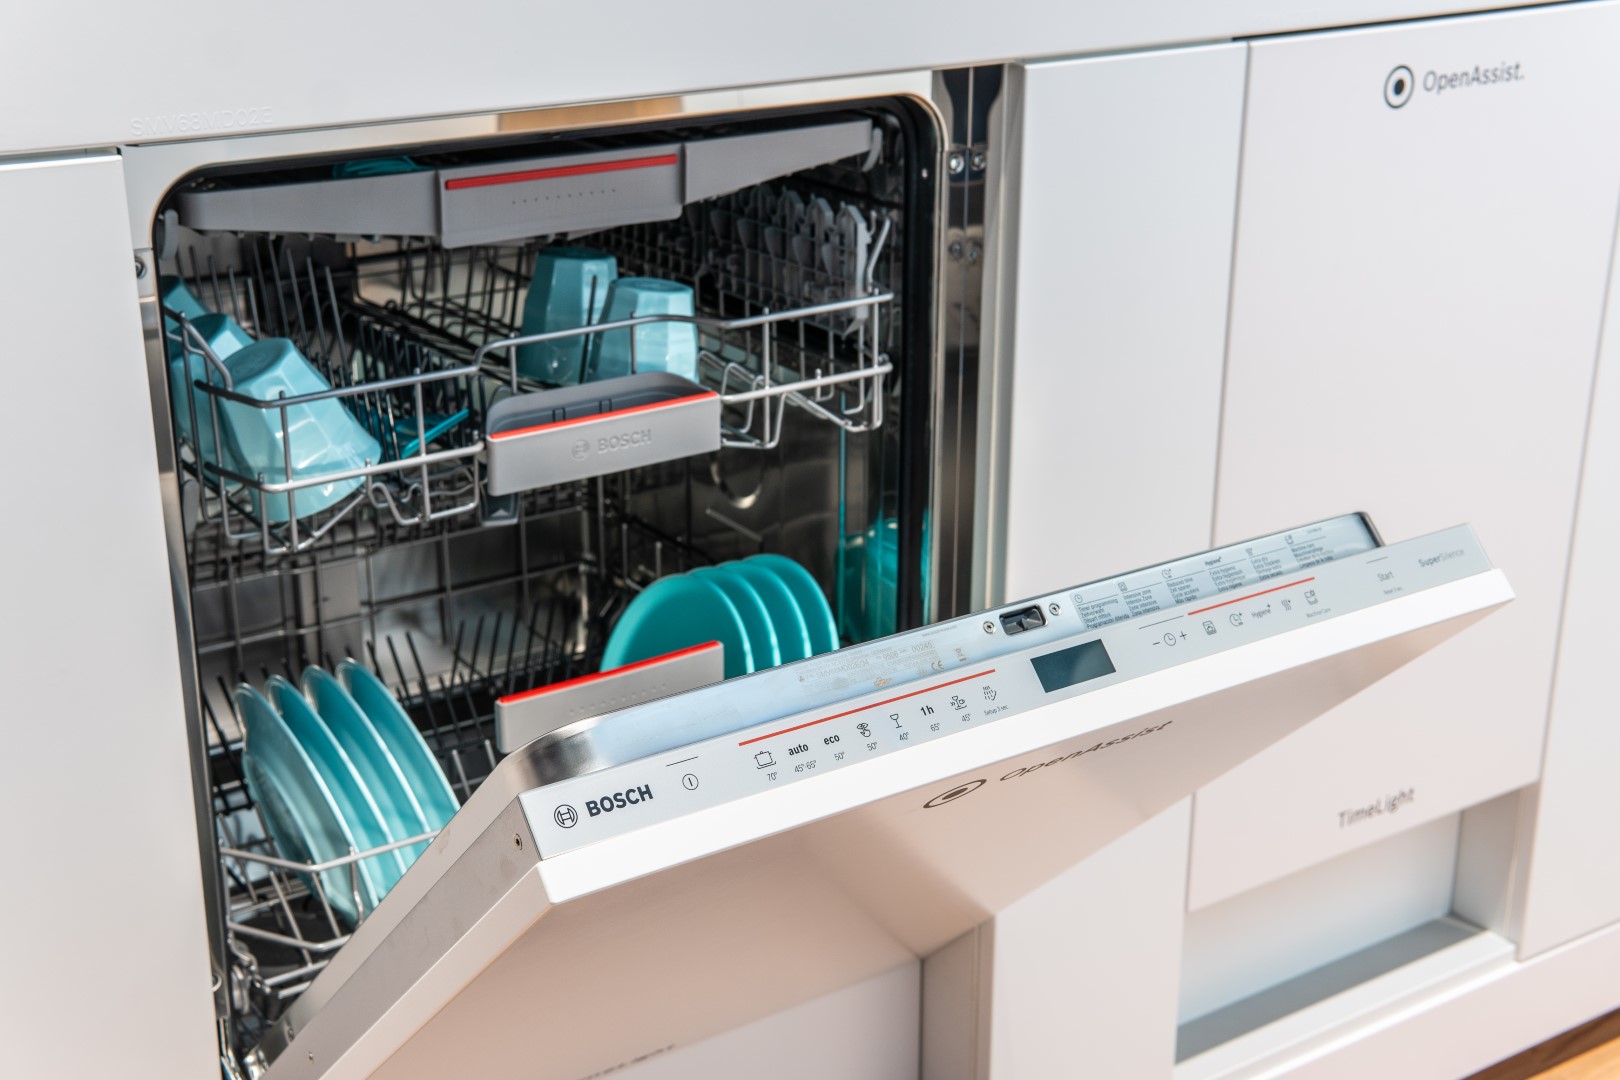 Bosch Dishwashers 3 Reasons Why They Are the Best BrandSource Canada